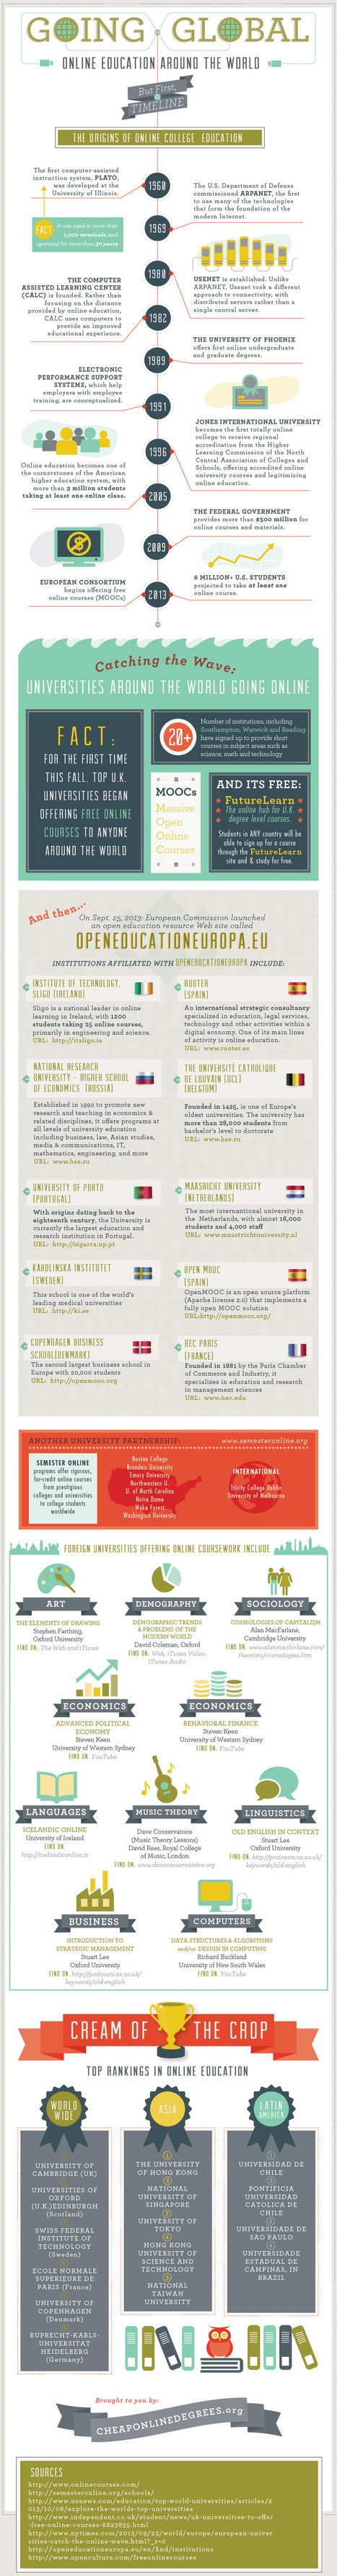 Infographic: Online Education Around the World | Digital Delights - Digital Tribes | Scoop.it